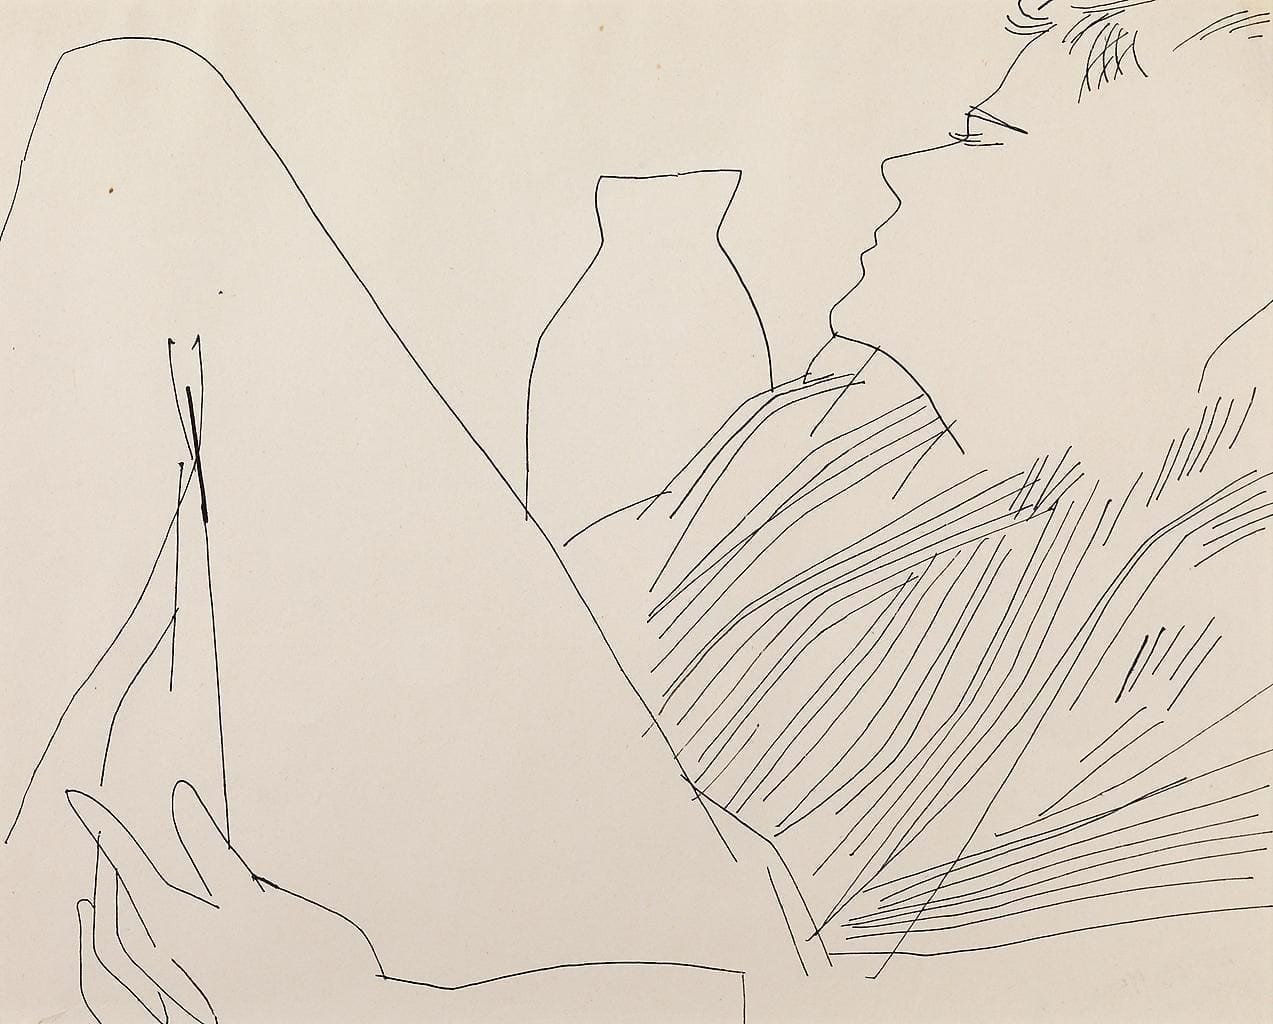 Reclining Figure (In Striped Shirt) by Andy Warhol